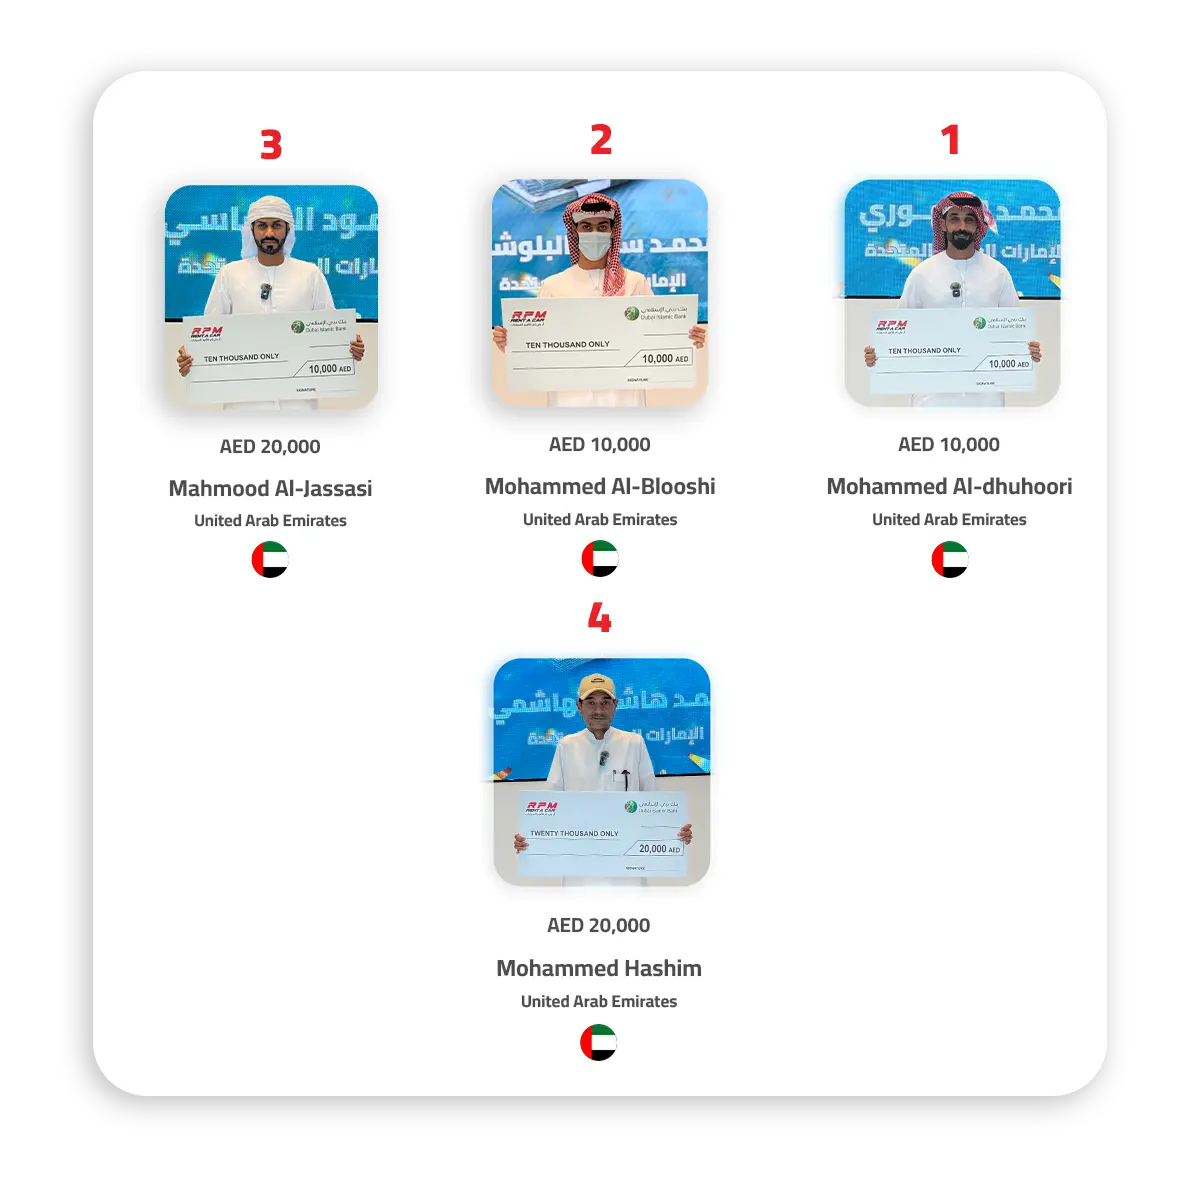 05 Winners From 10,000 AED Cash English